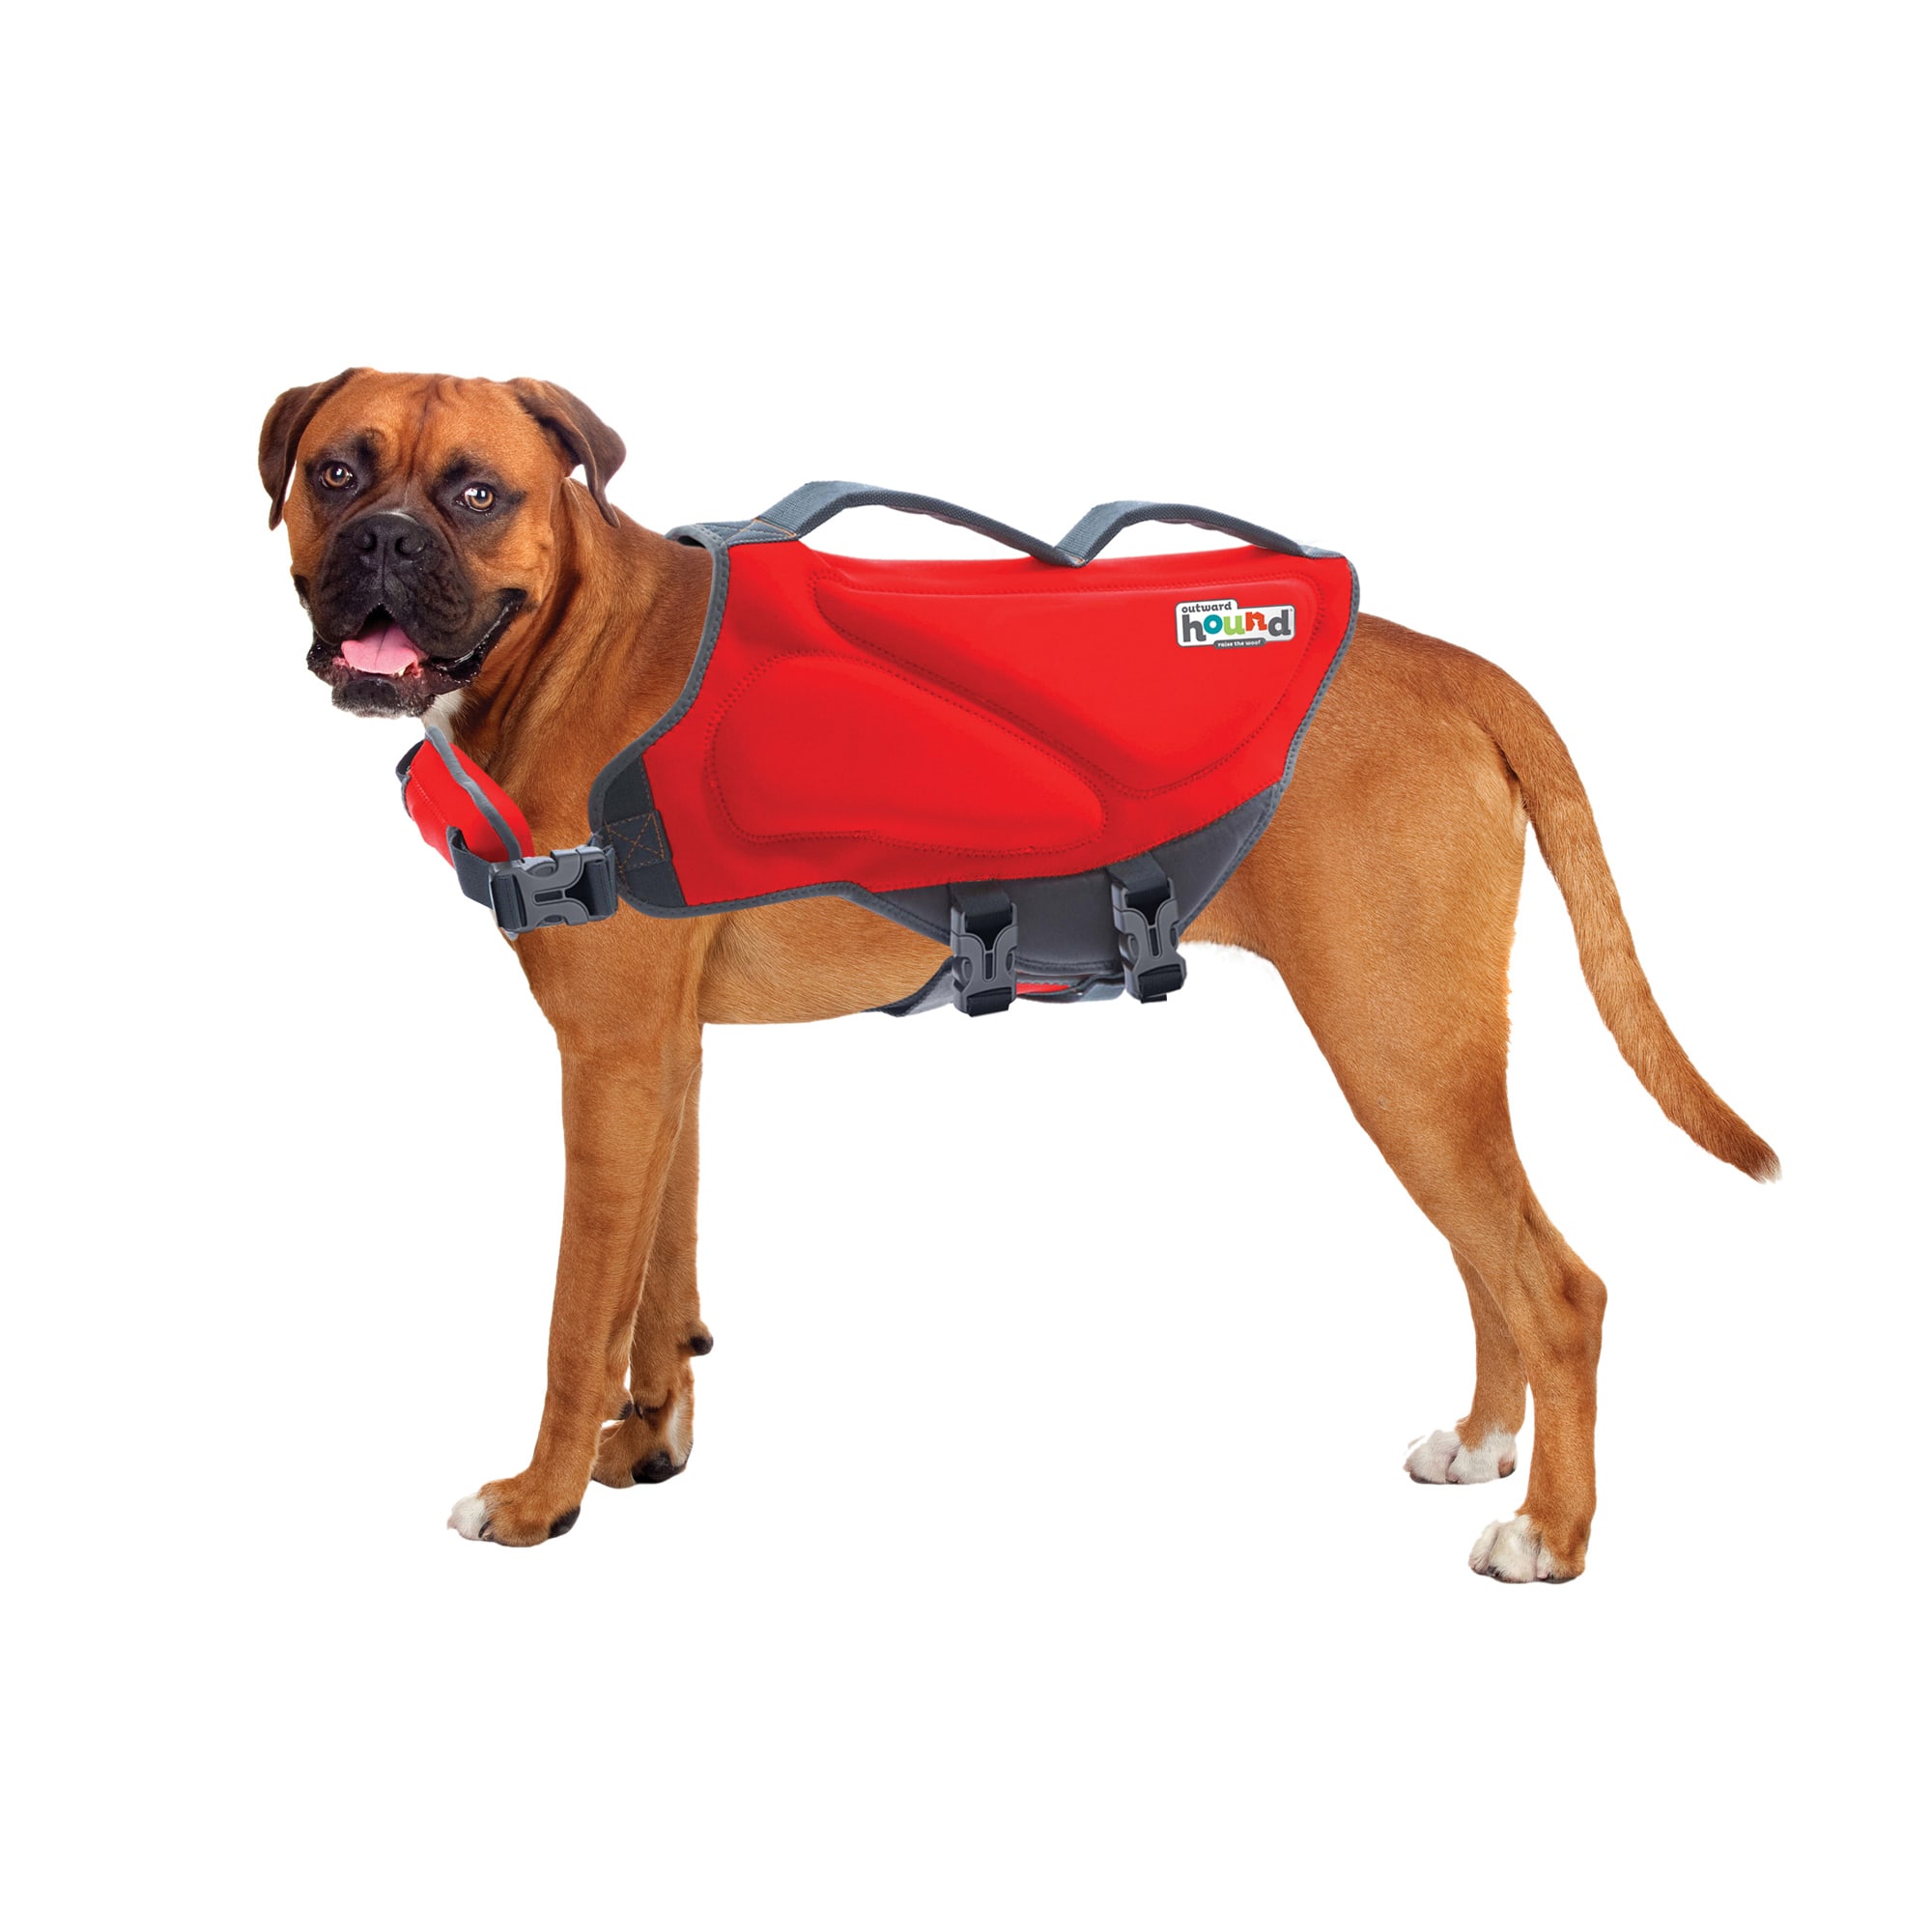 Outward Hound Dawson Swim Red Life Jacket for Dogs, X-Large | Petco